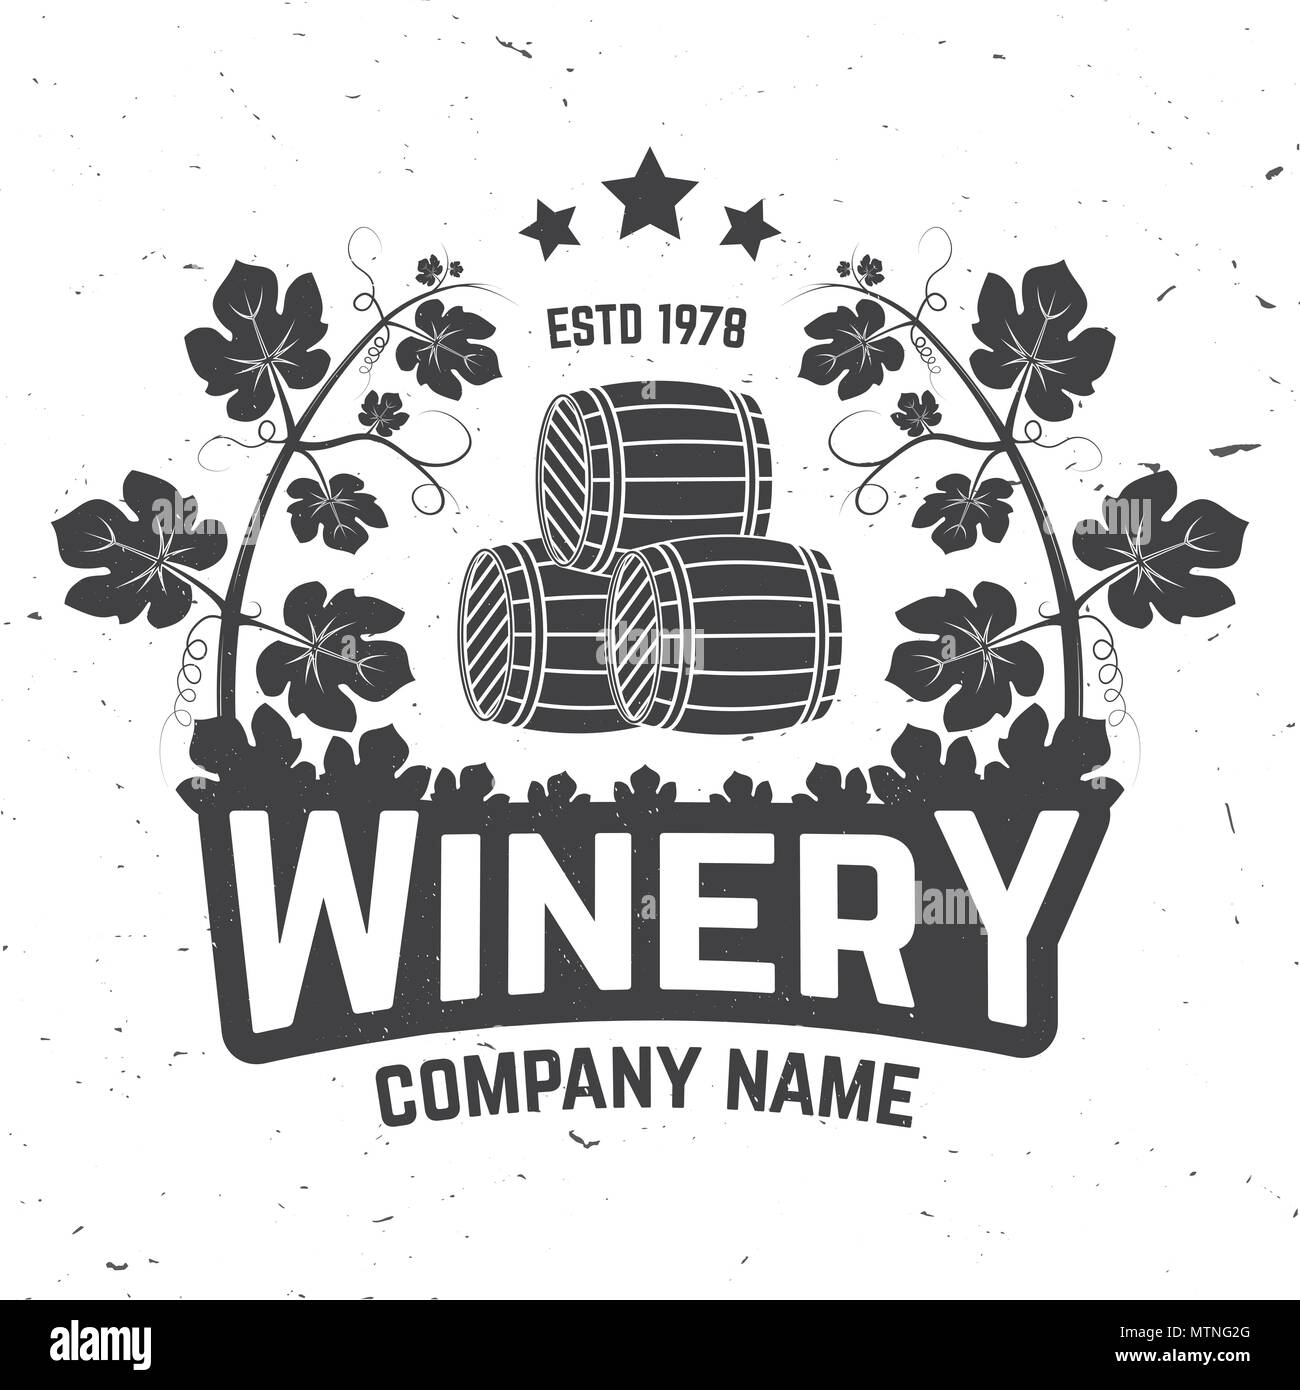 Winery company badge, sign or label. Vector illustration. Vintage design for winery company, bar, pub, shop, branding and restaurant business. Coaster for wine glasses Stock Vector